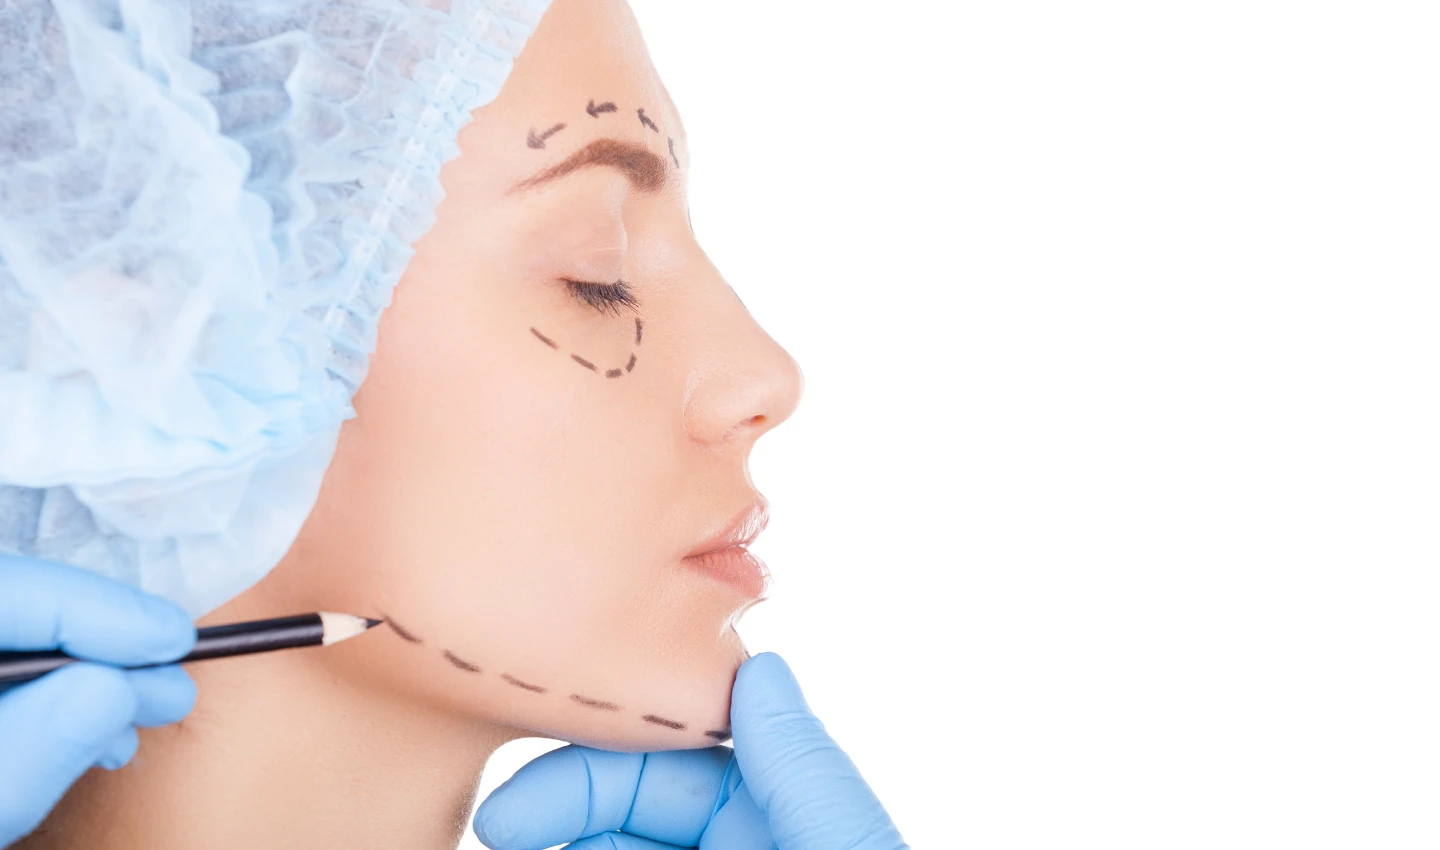 Image of a dermatologist examining a young woman's skin and drawing lines around her eyes, eyebrows, and jawline. The image represents the transformative power of Kybella non-surgical injections in enhancing facial harmony and balance.